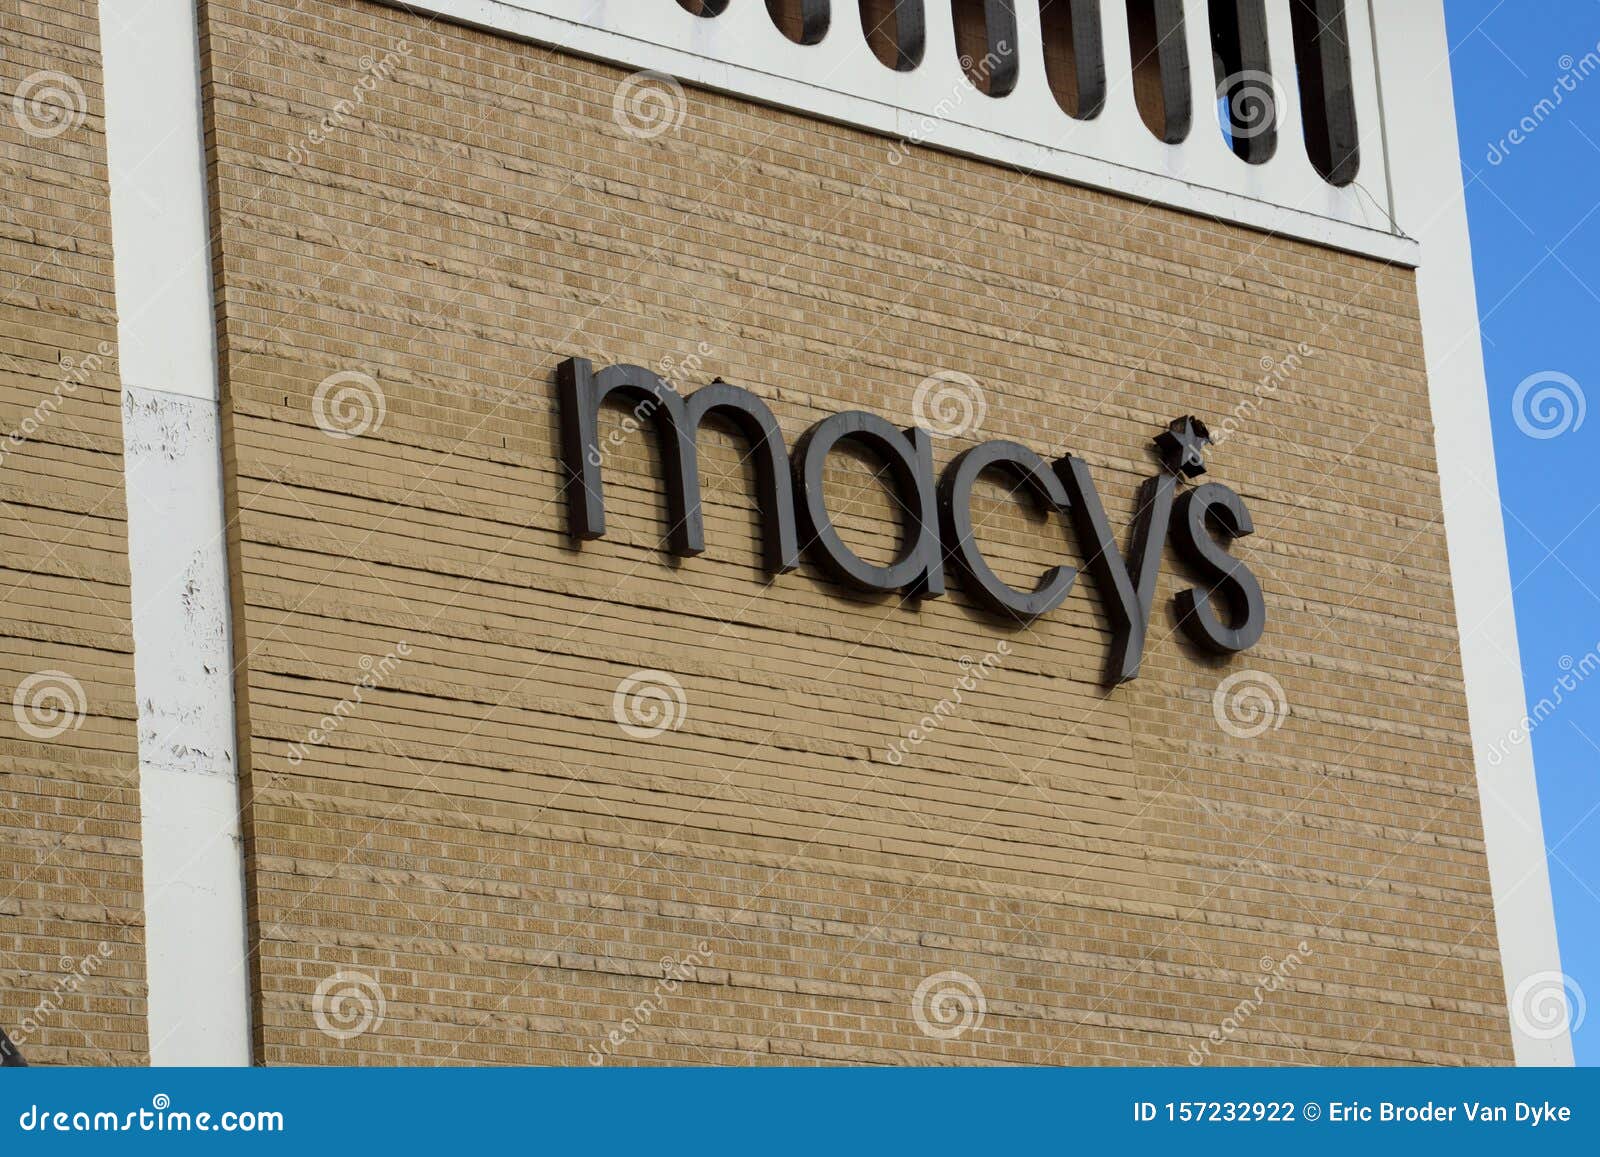 Macy S Store Sign in Honolulu Editorial Photography - Image of signage ...